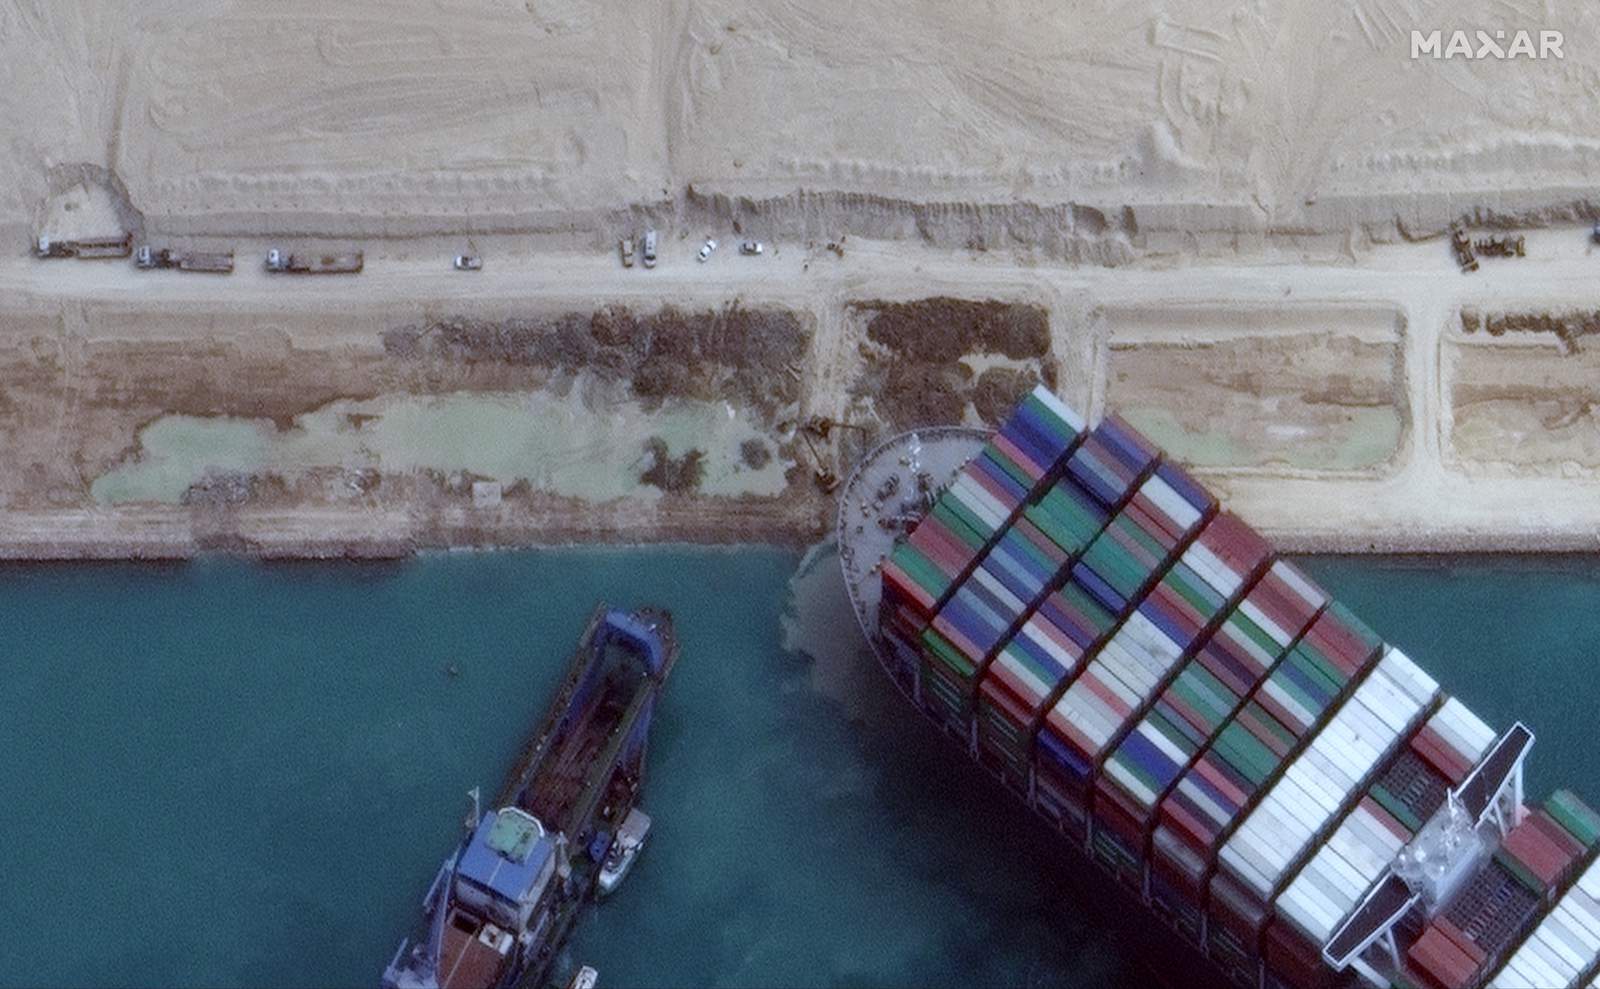 Update: Massive container ship that was stuck in Suez Canal is free, on the move again, service firm says